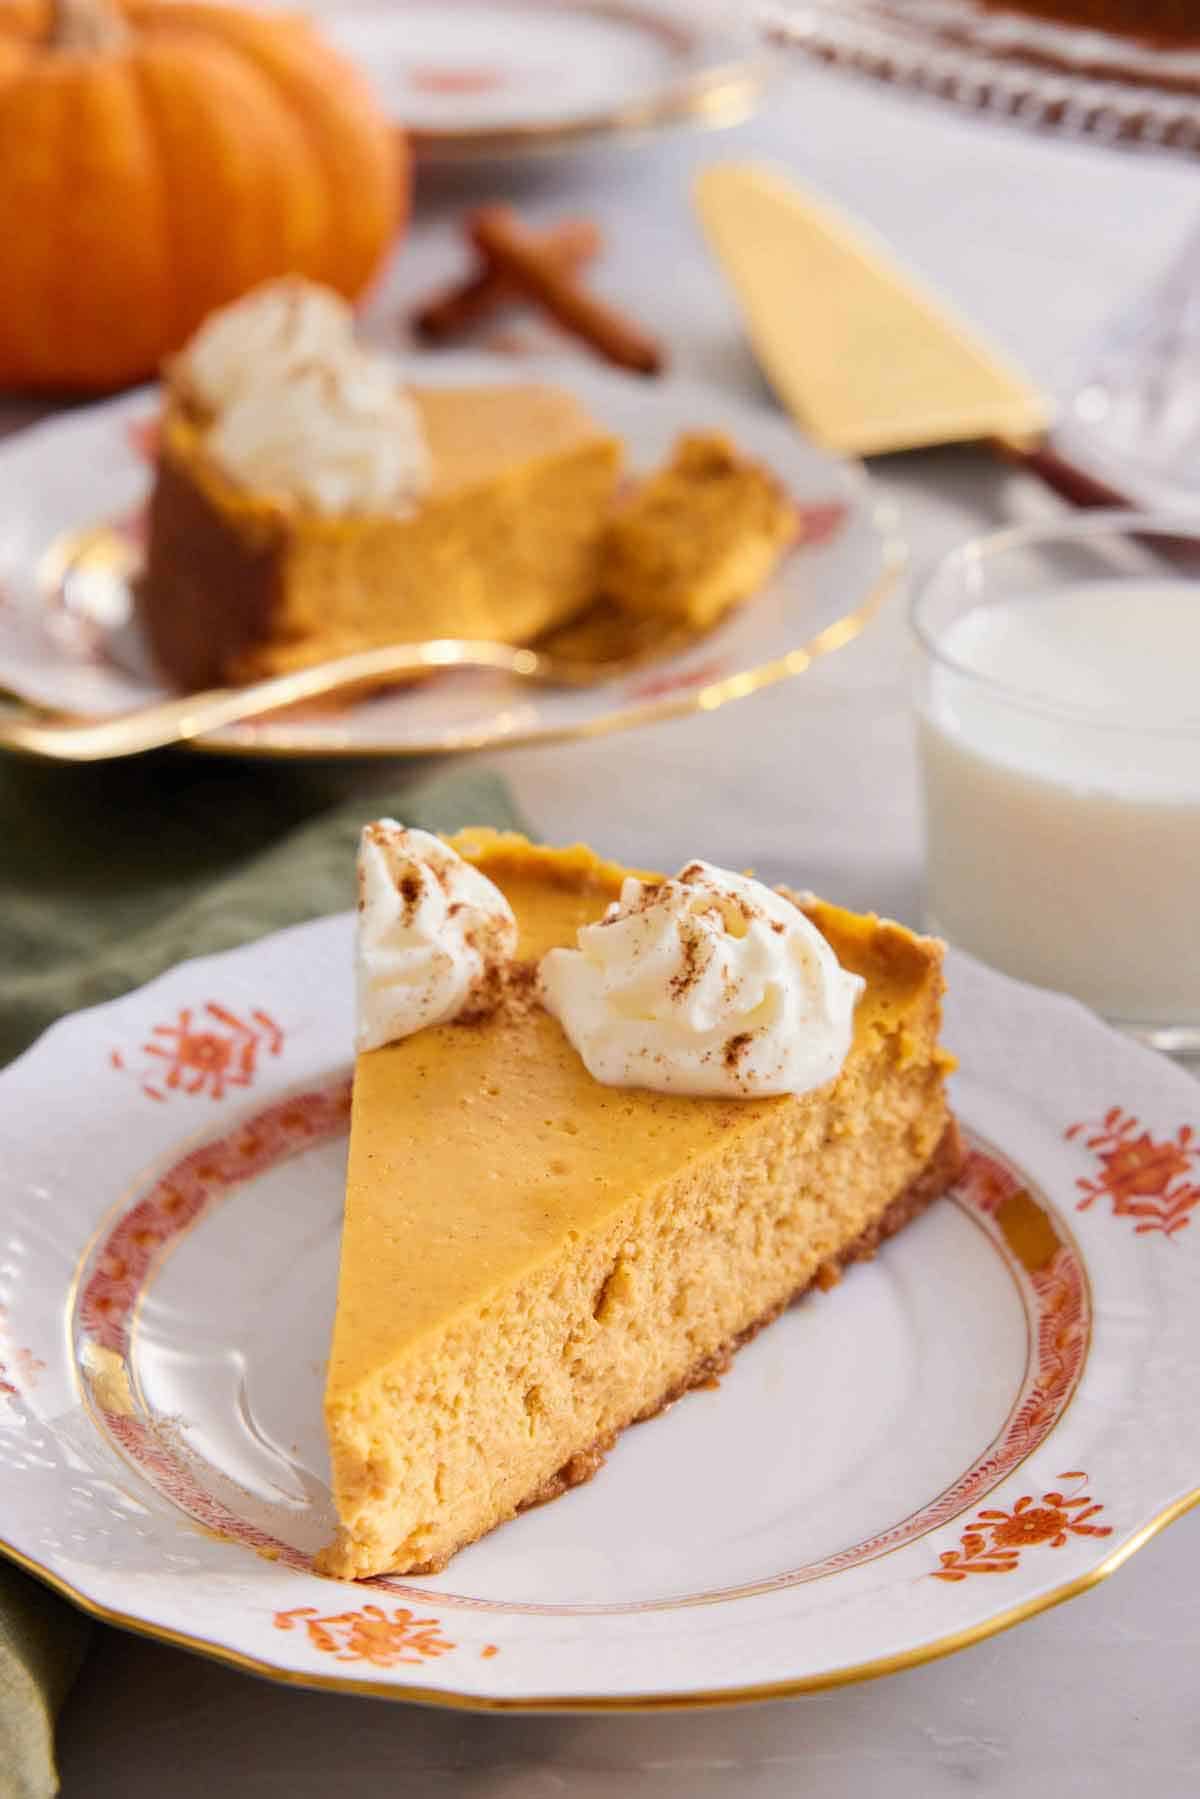 A slice of pumpkin cheesecake on a plate topped with whipped cream. A glass of milk and second slice in the background.